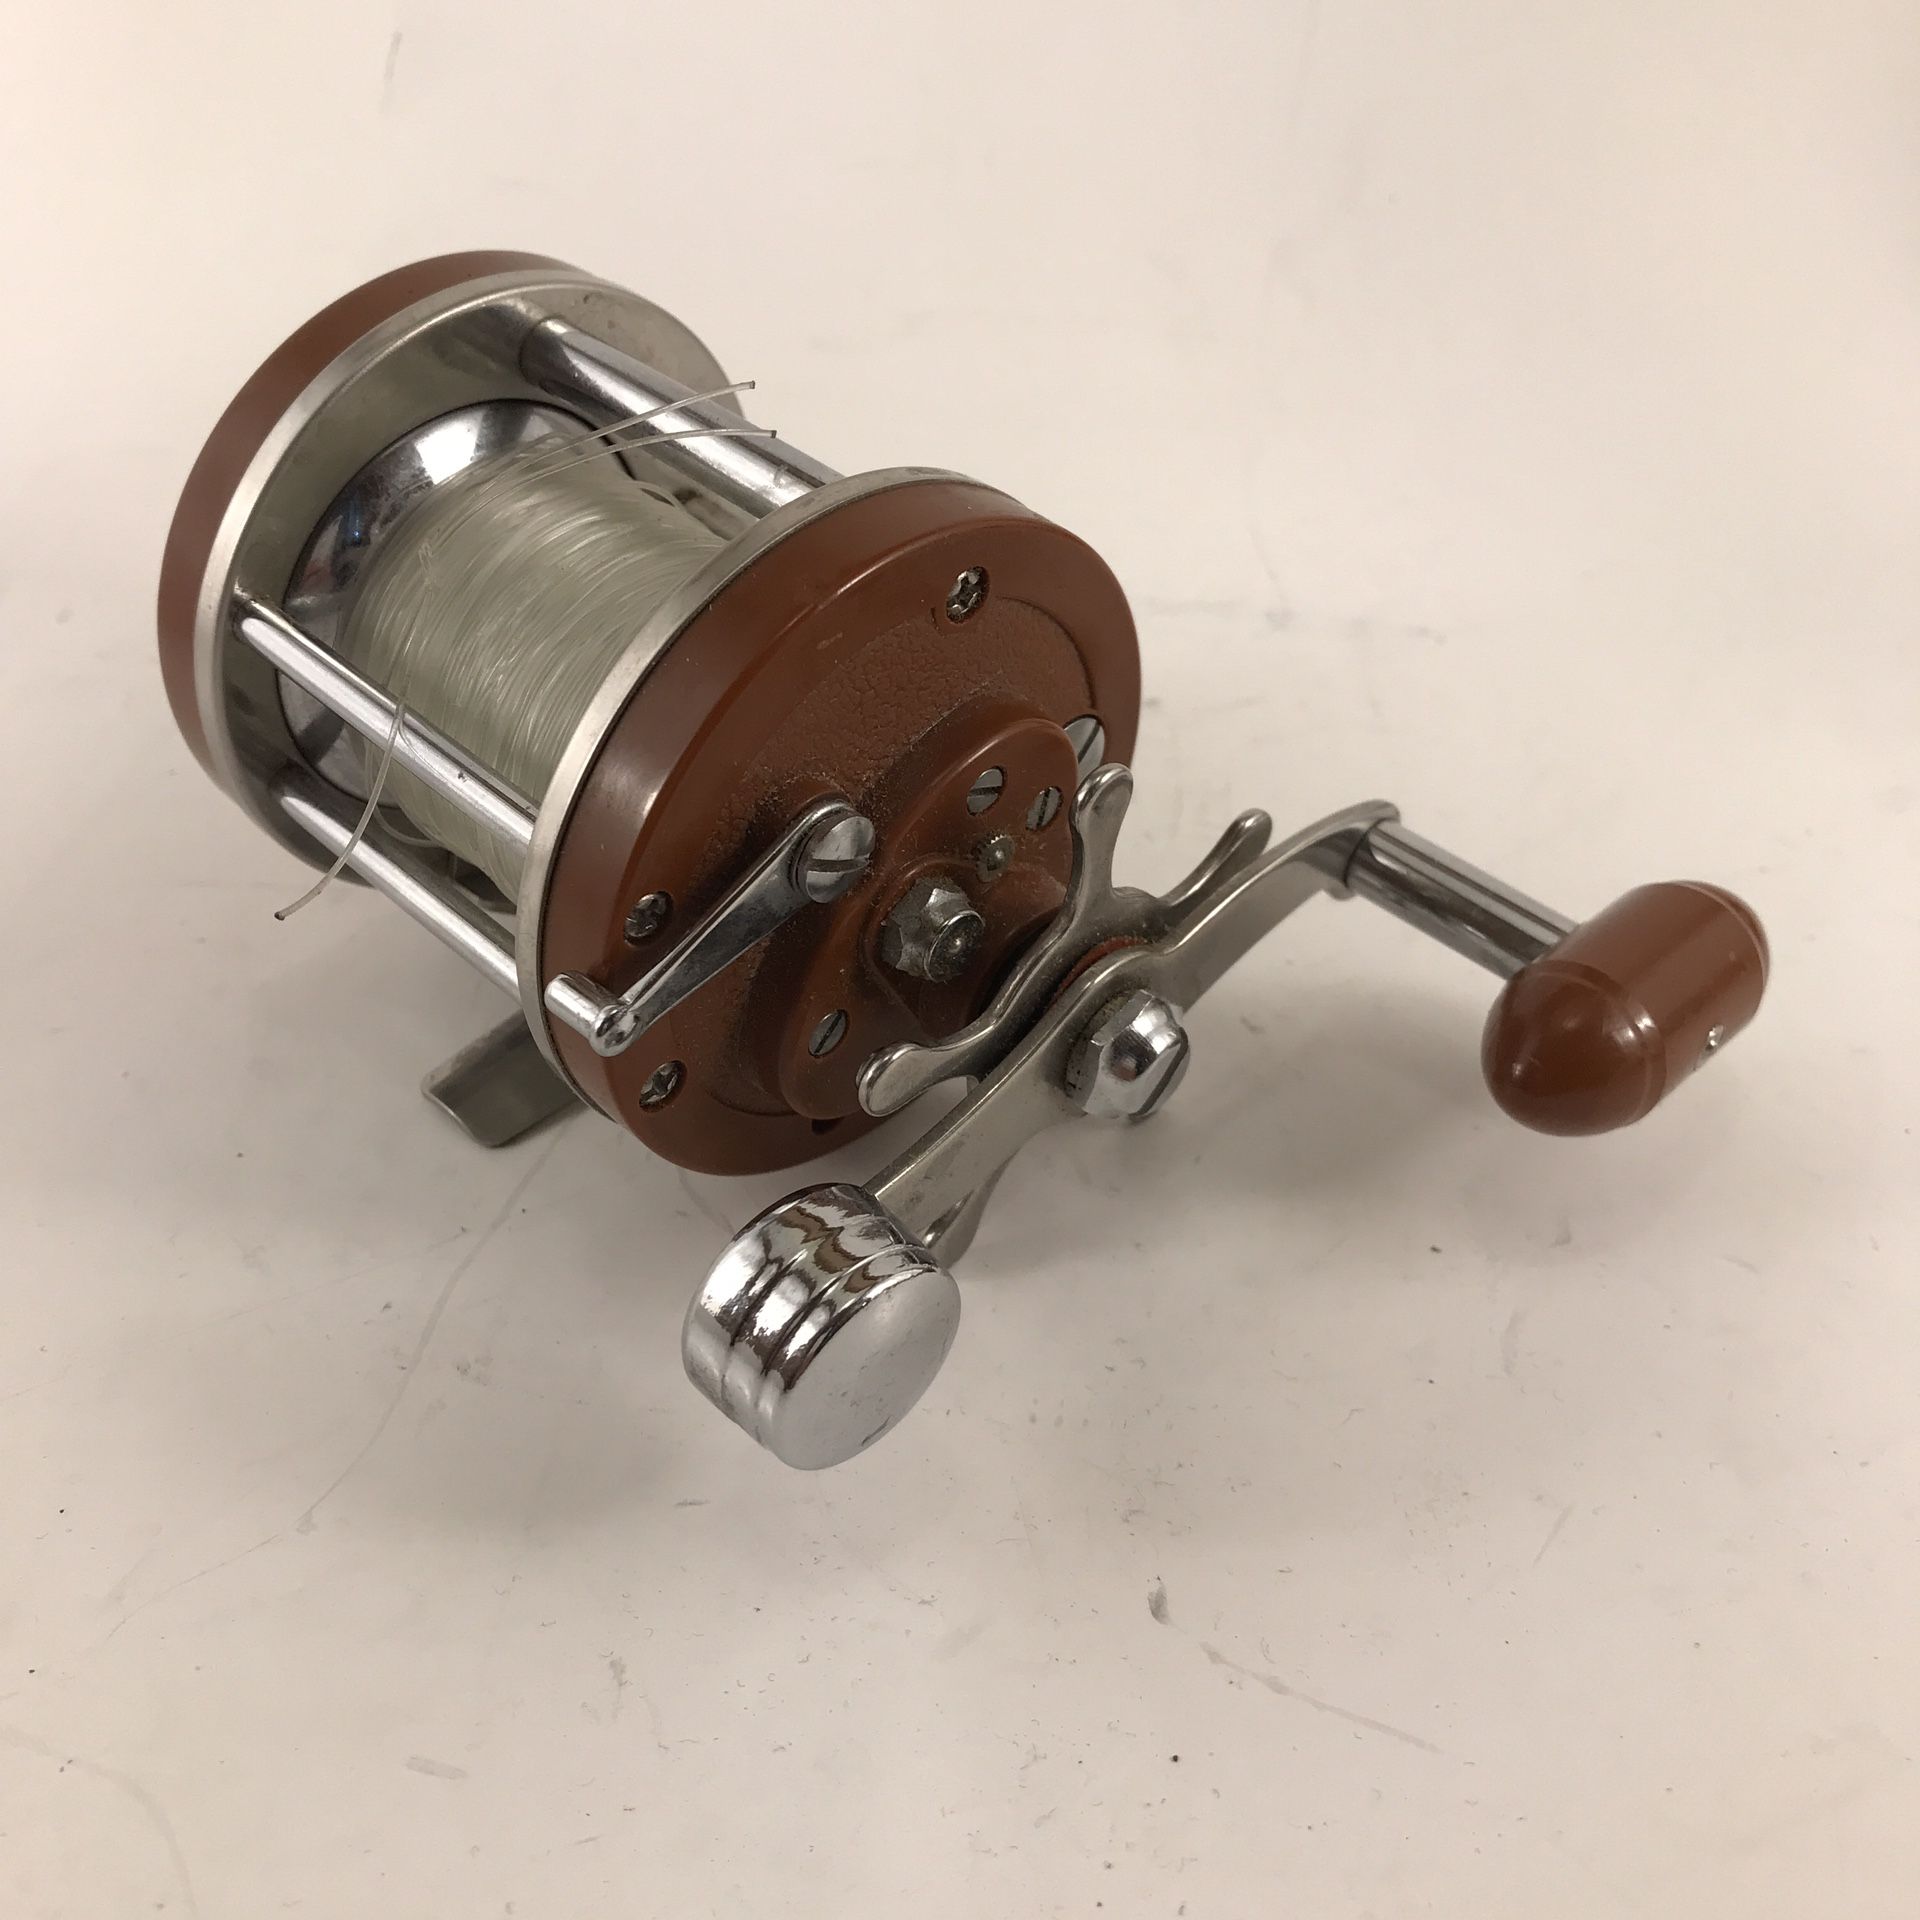 Eagle Claw 502 HD Vintage Fishing Reel for Sale in Anchorage, AK